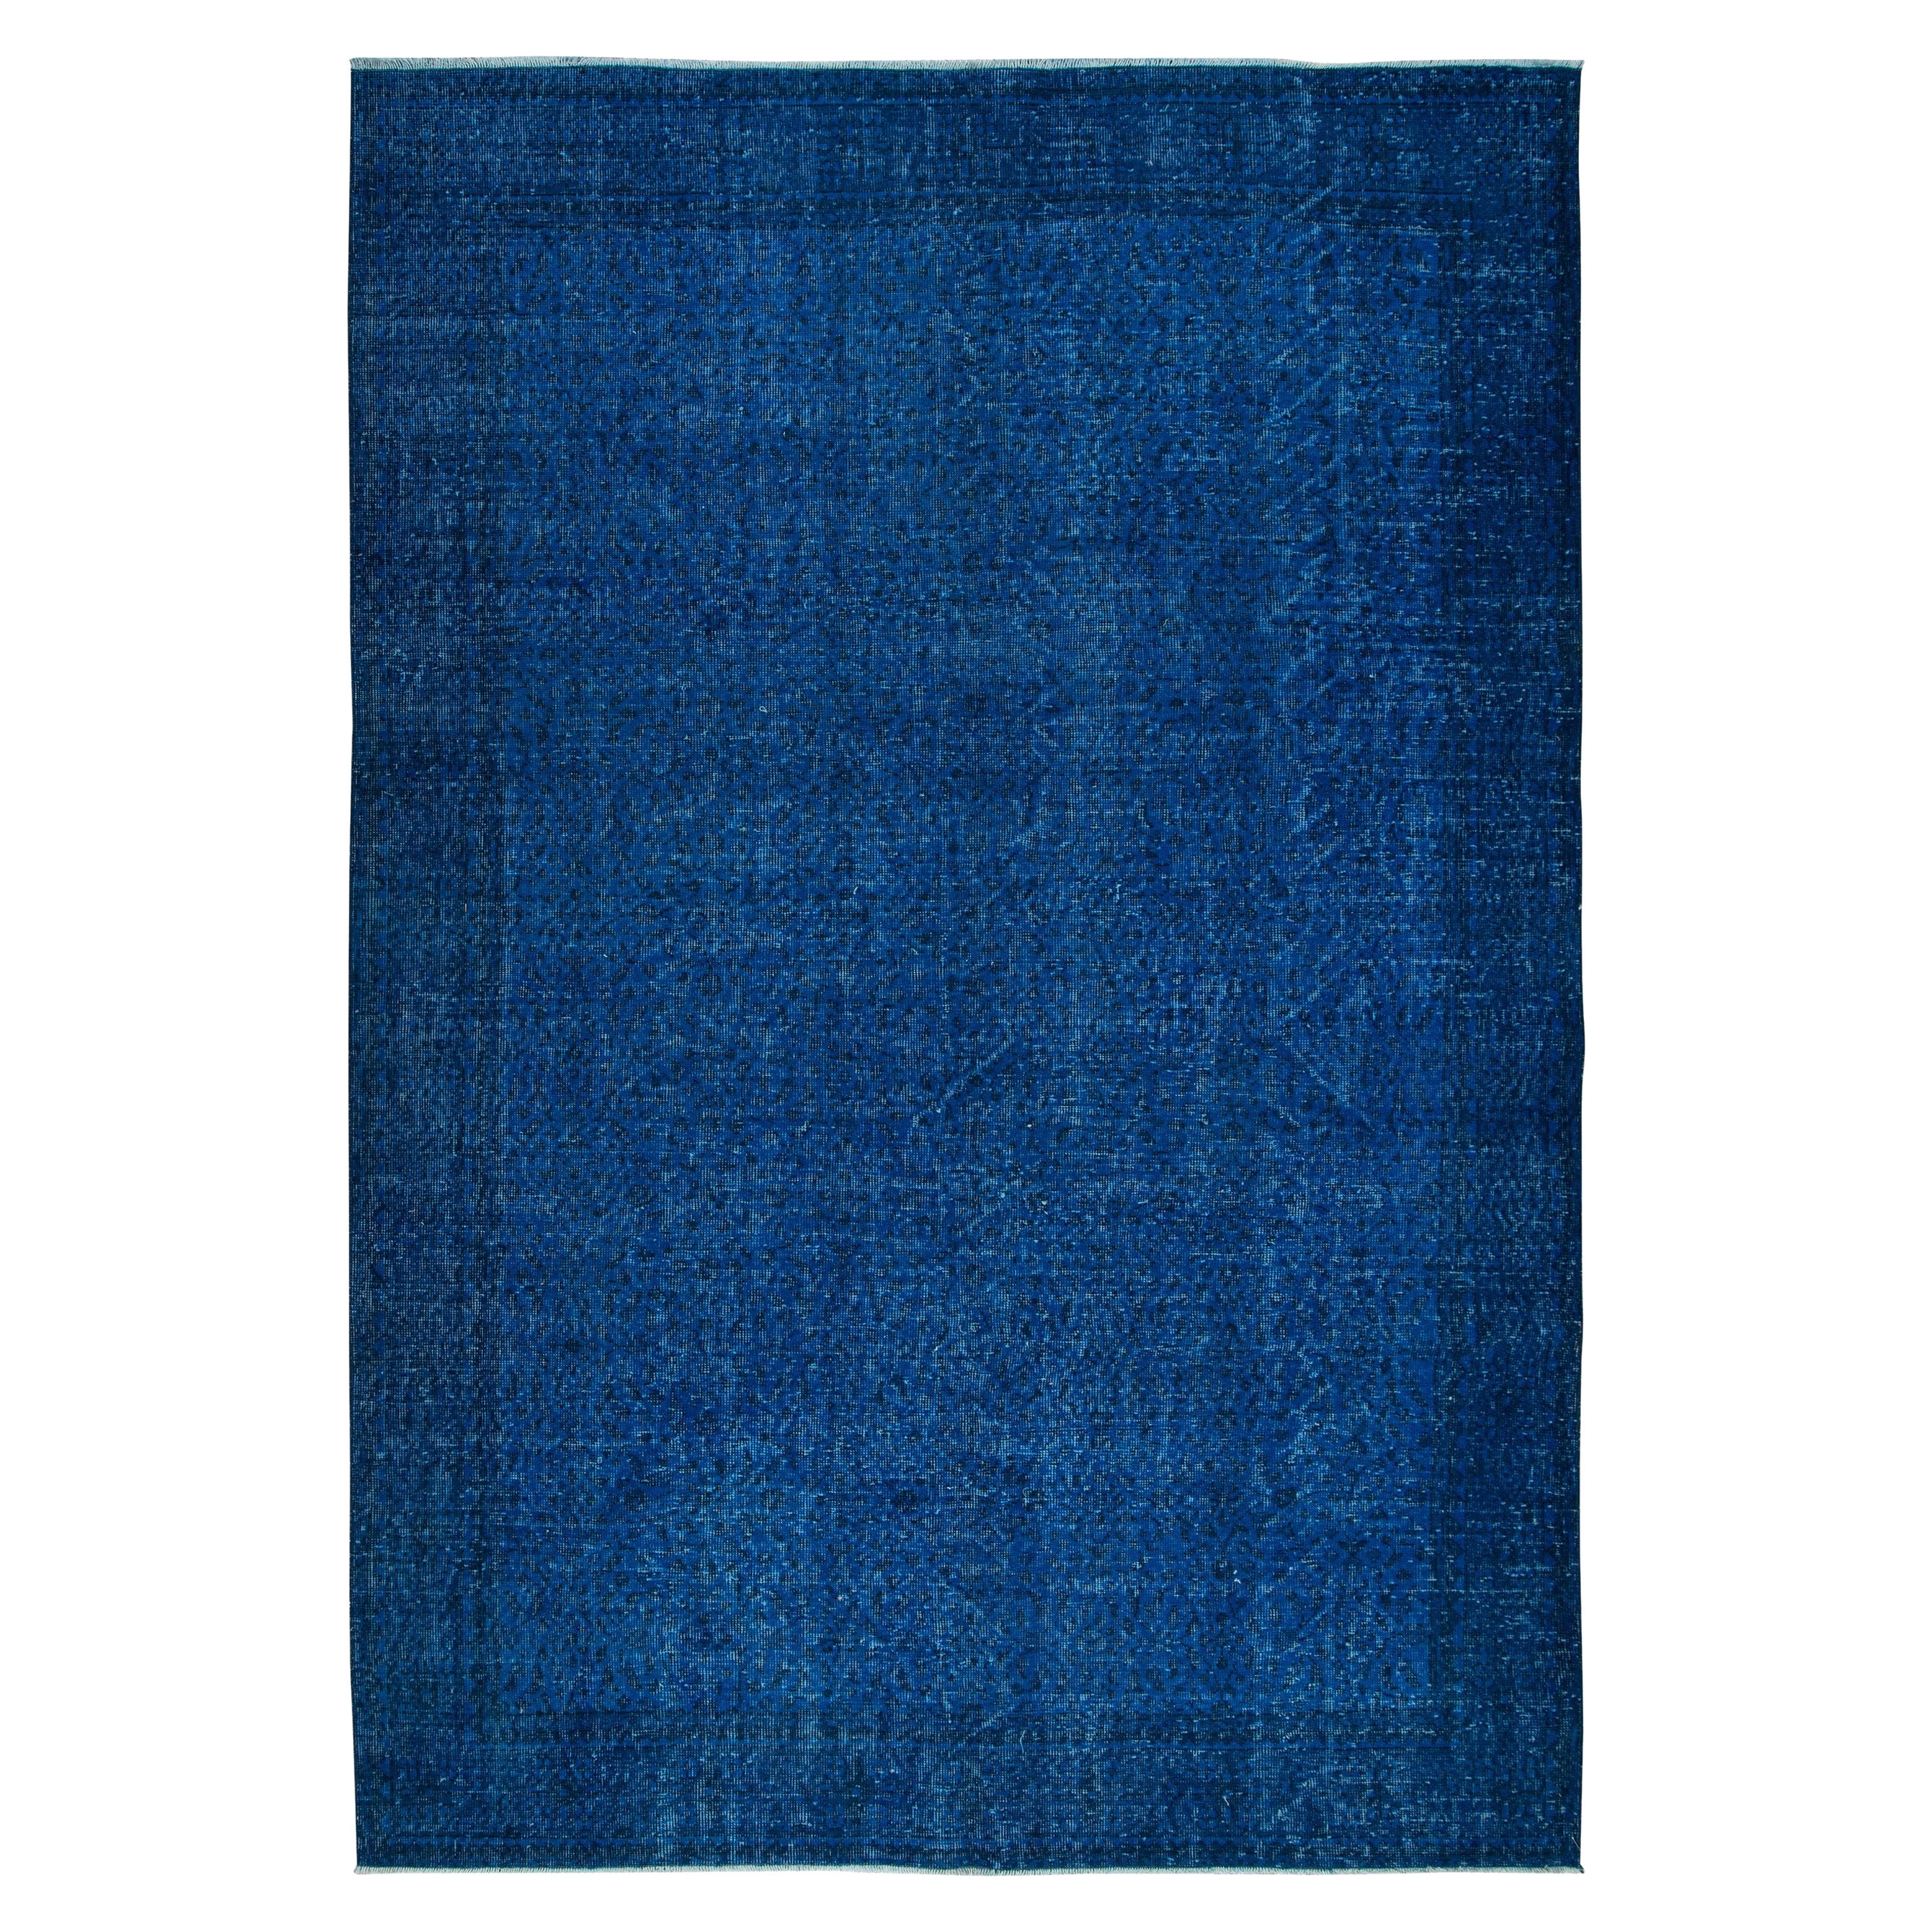 7x10 Ft Modern Blue Area Rug made of wool and cotton, Hand-Knotted in Turkey